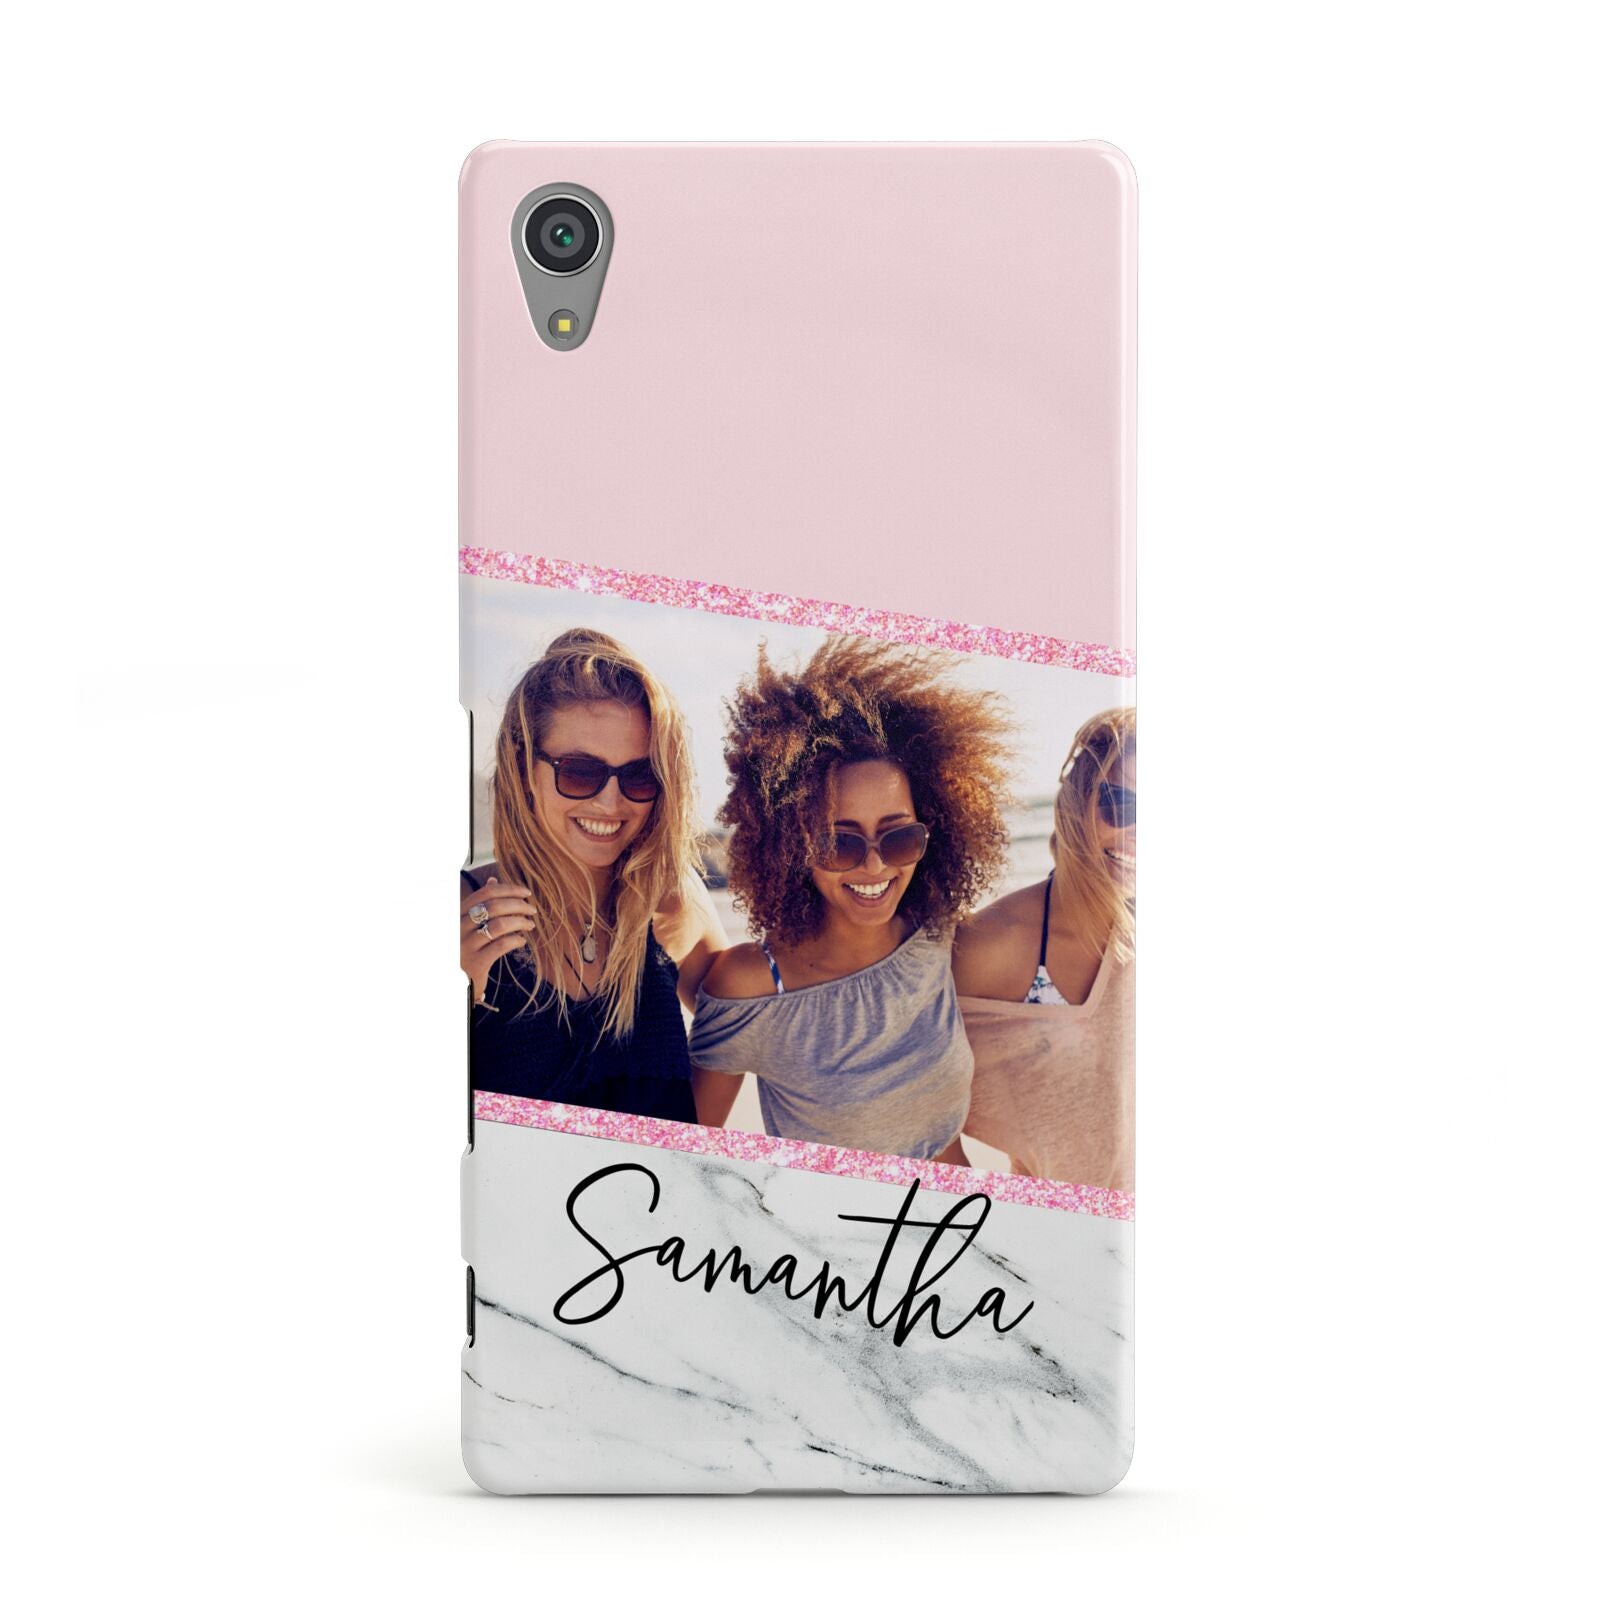 Personalised Marble Photo Name Sony Xperia Case